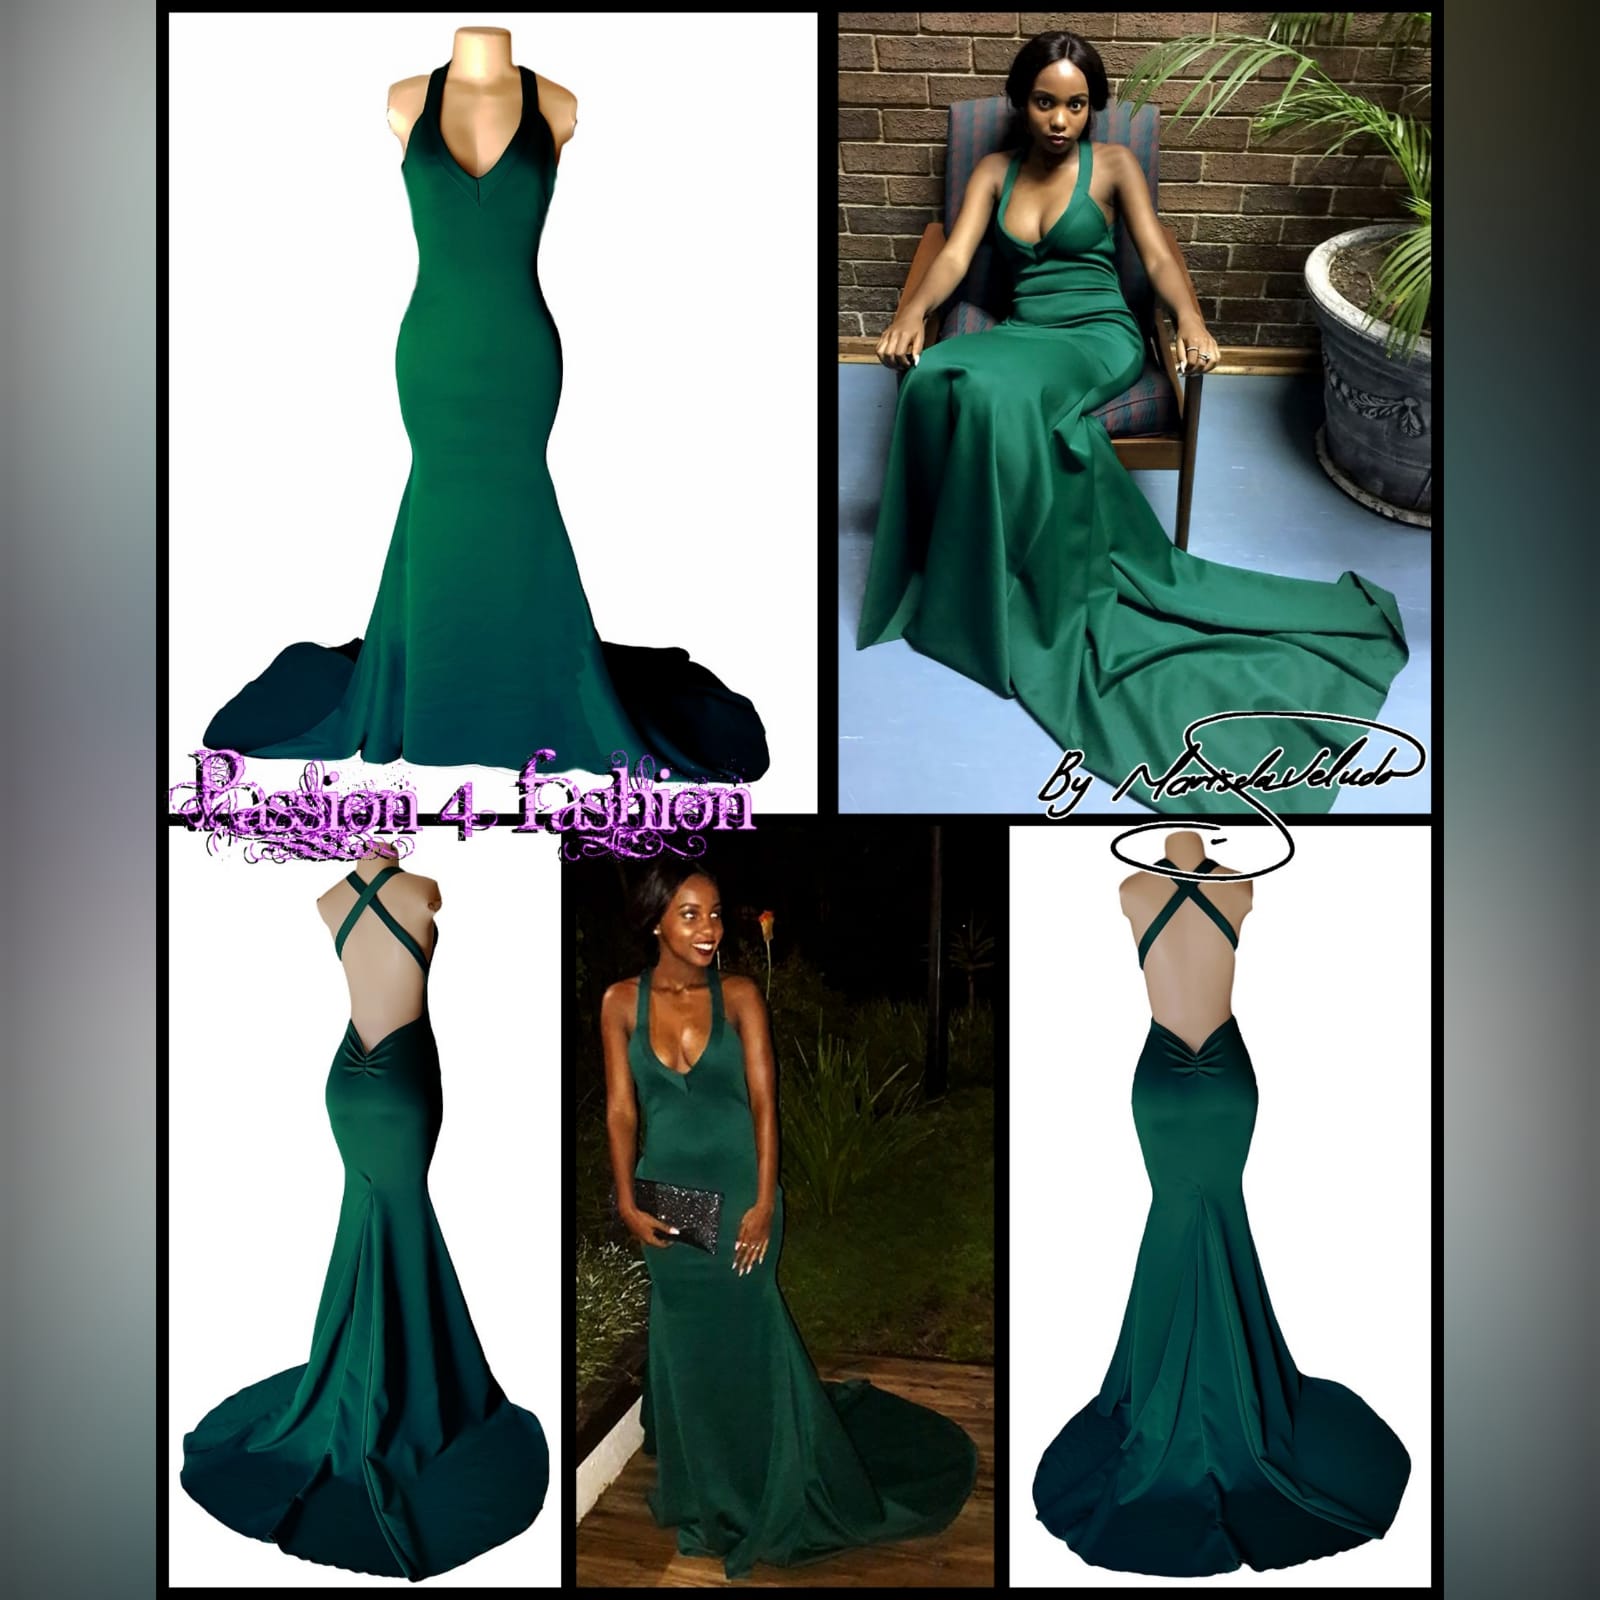 Emerald green soft mermaid prom dress 7 emerald green soft mermaid prom dress, with a v neckline, low open v back with pleated detail and crossed straps, with a train.